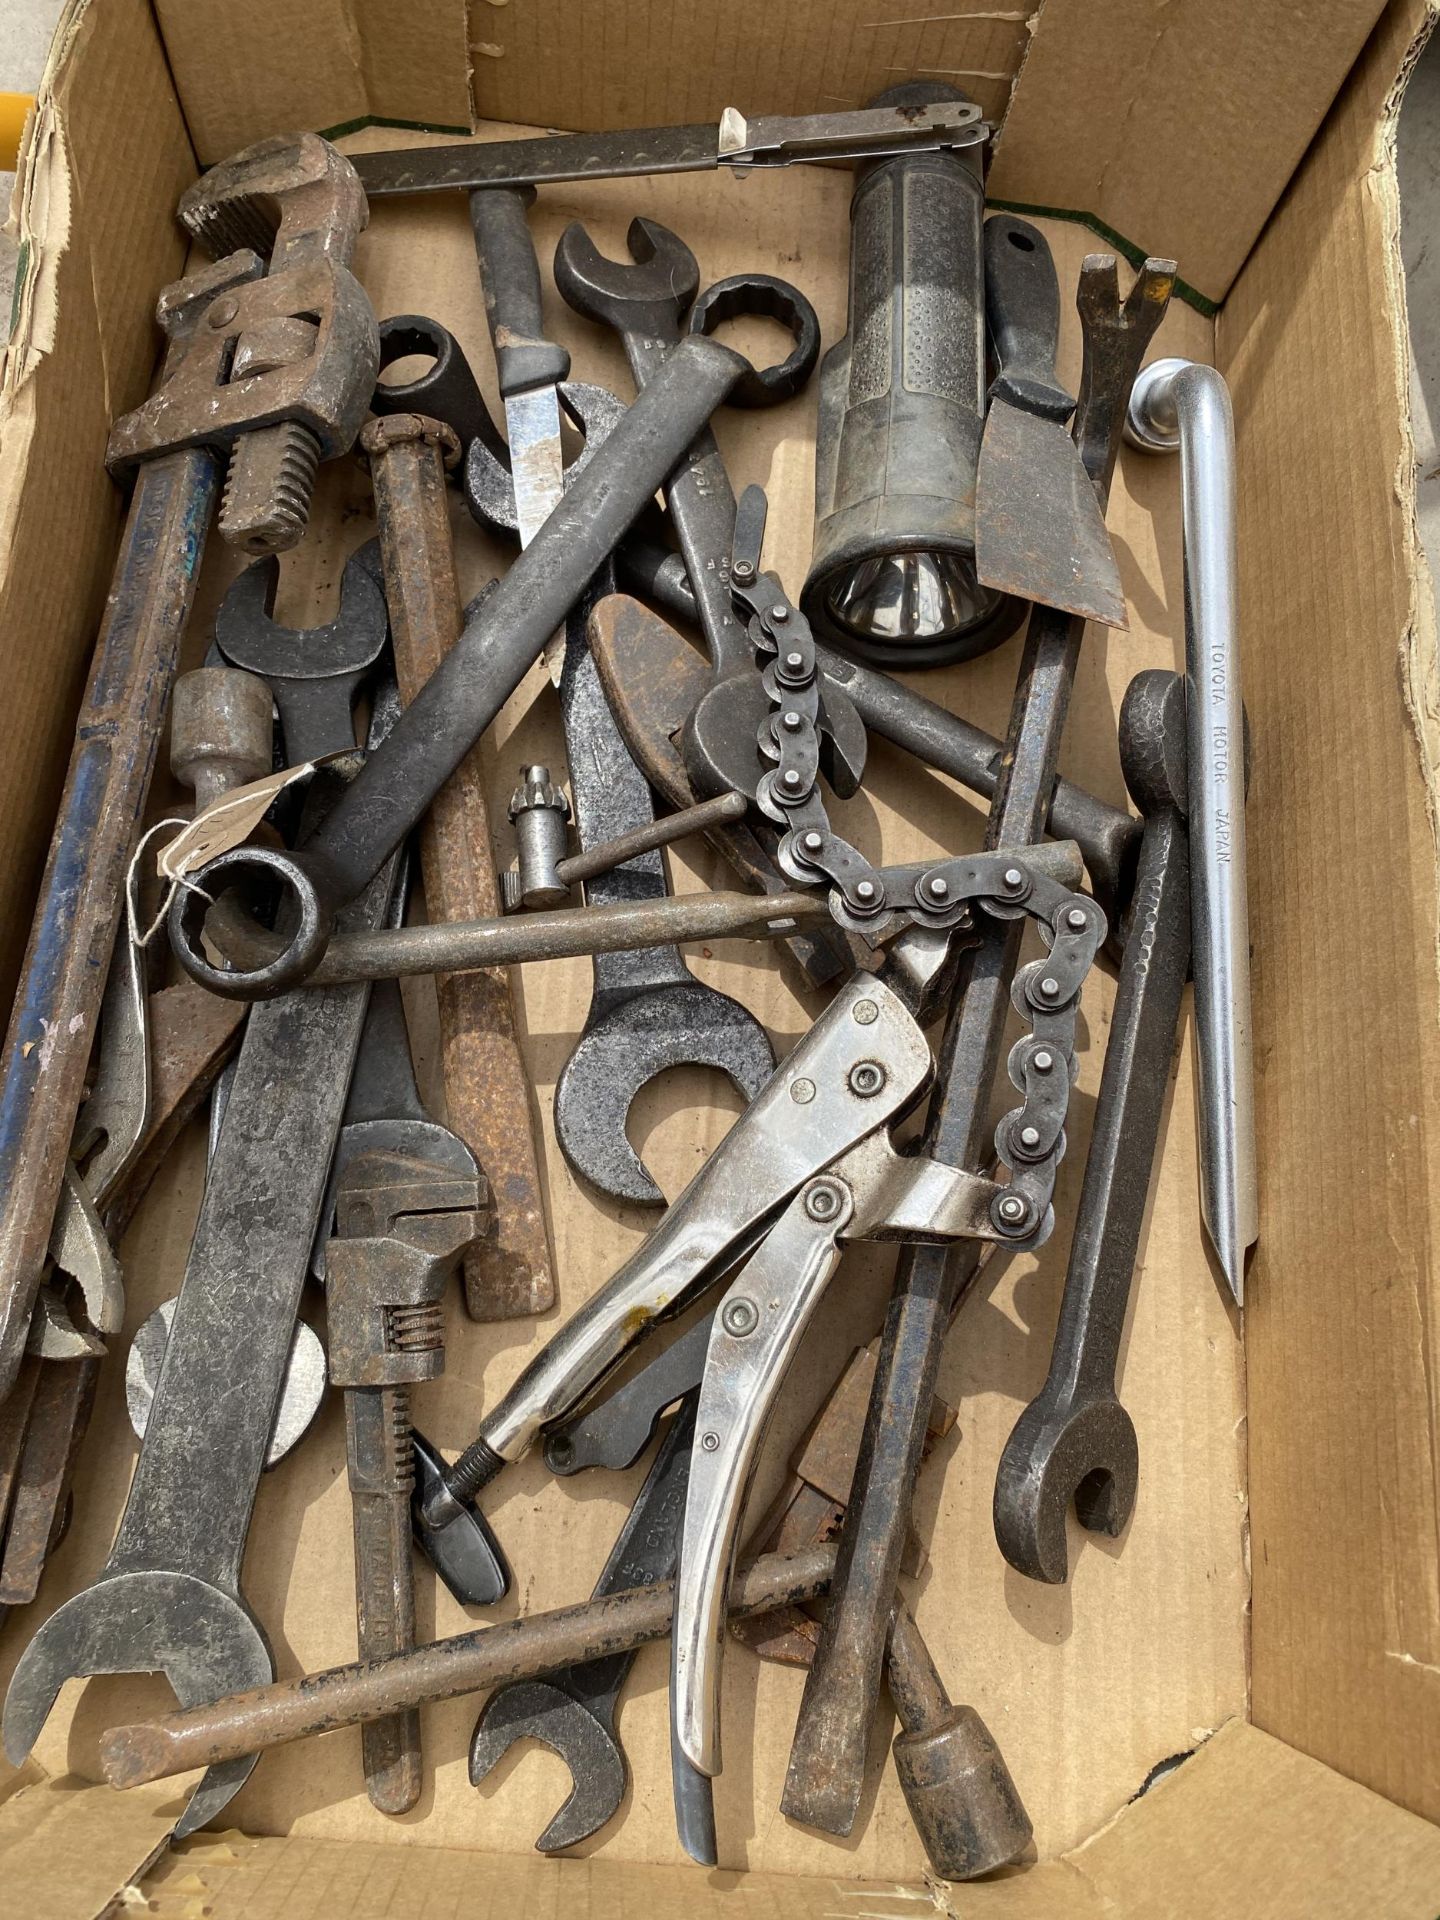 AN ASSORTMENT OF VINTAGE HAND TOOLS TO INCLUDE STILSENS AND SPANNERS ETC - Image 2 of 2